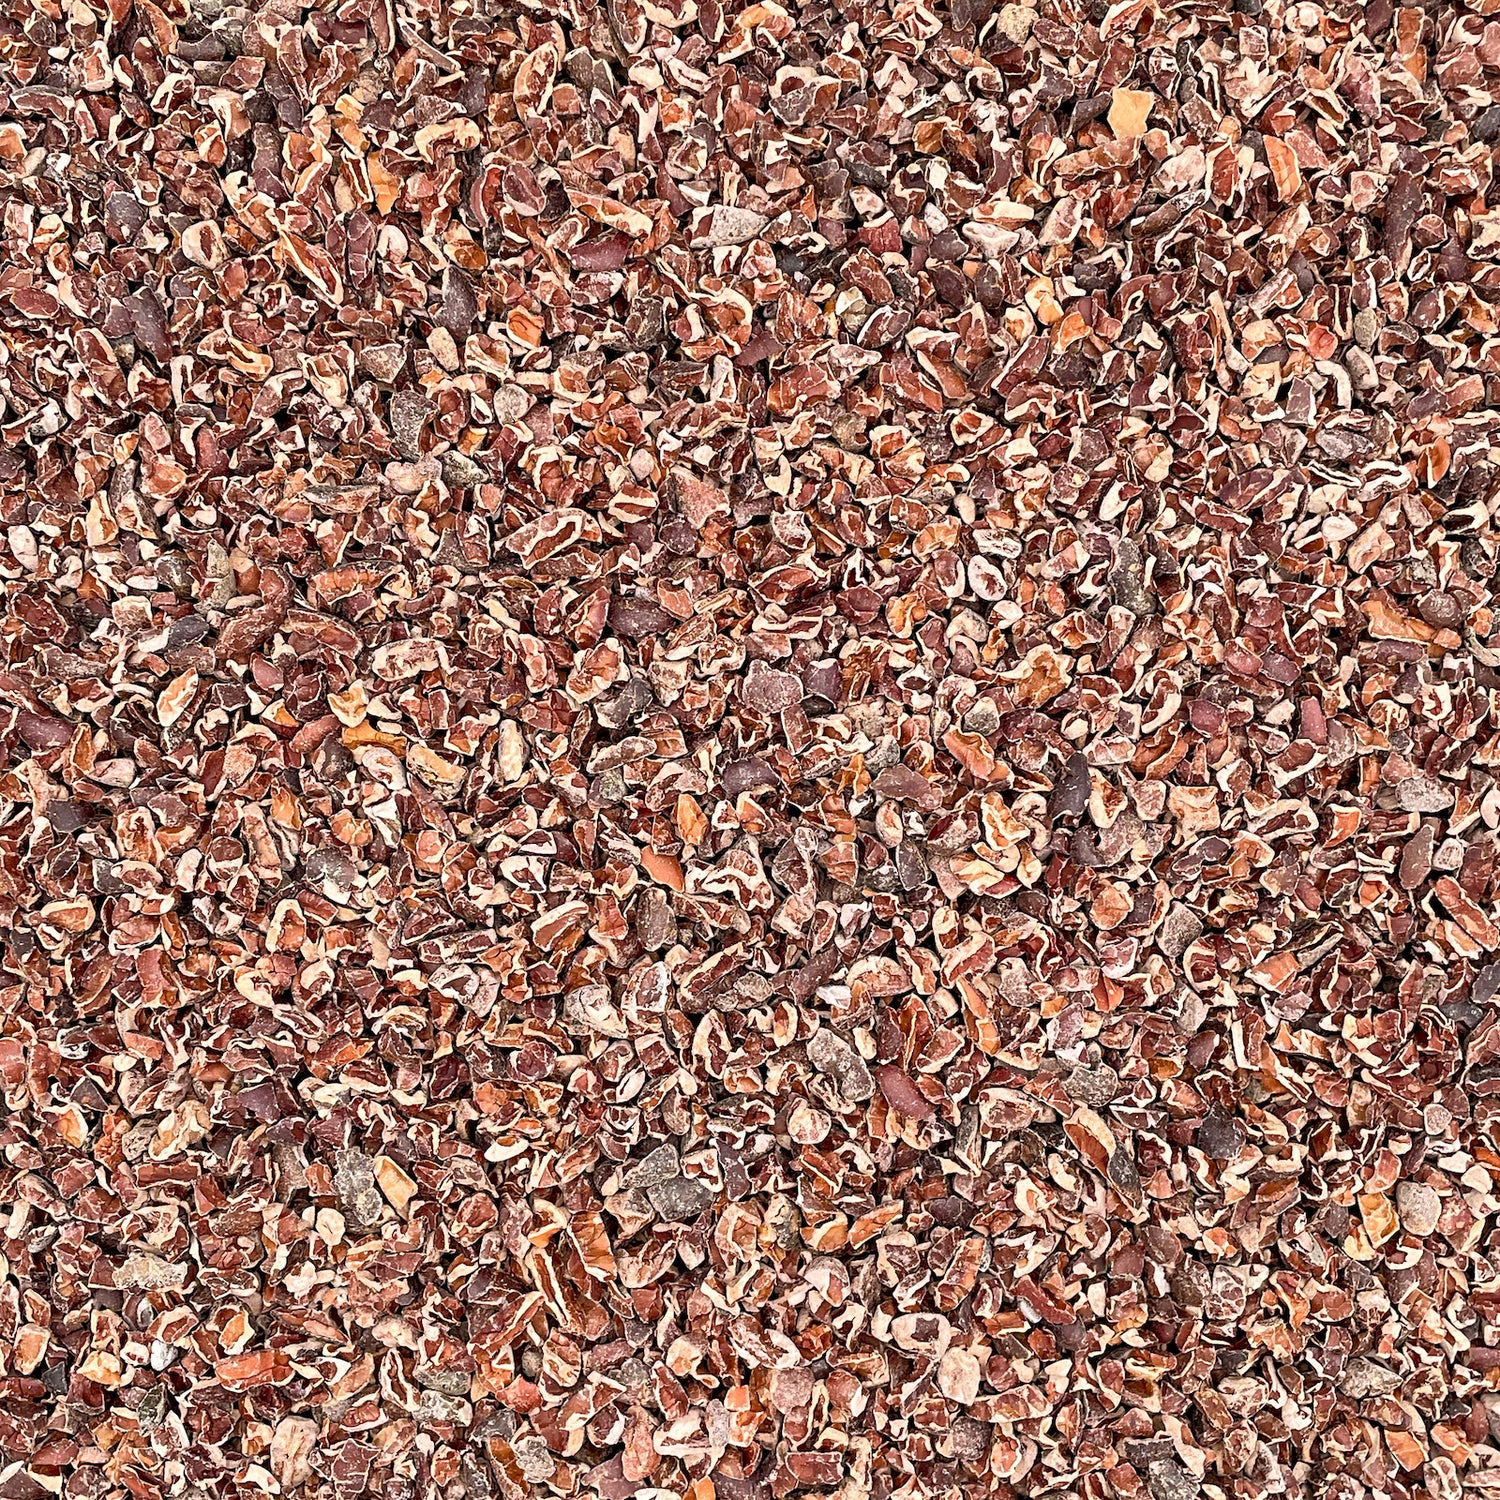 Cacao Nibs - Unsweetened, Organic (Chocolate Ingredient) –